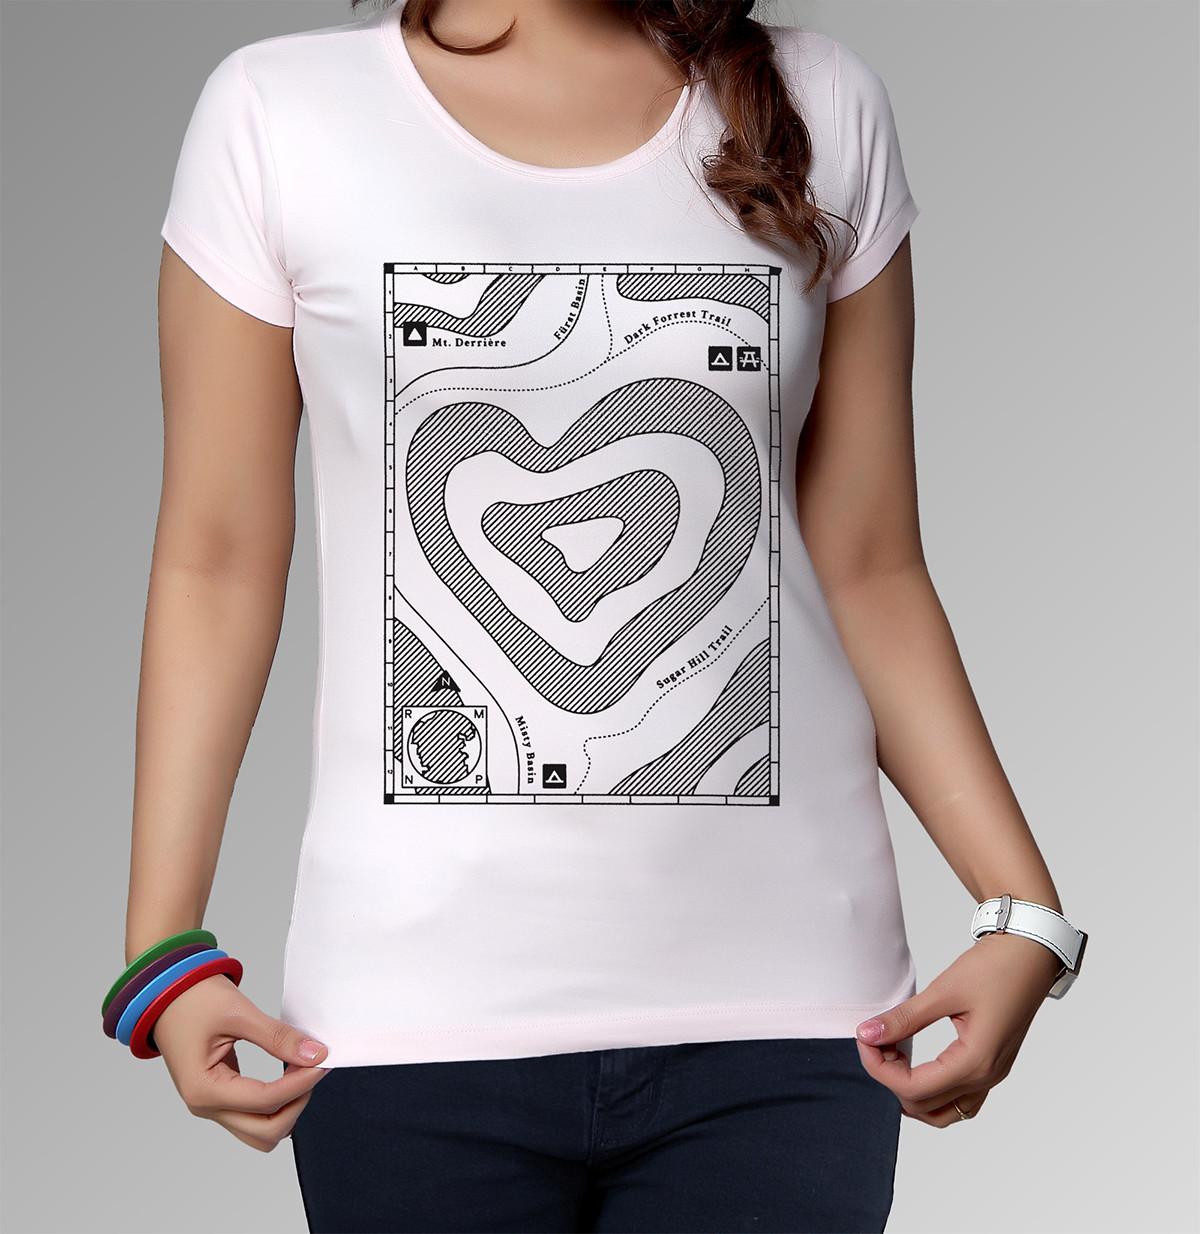 tshirt Competition Threadless national parks Topographic Love map